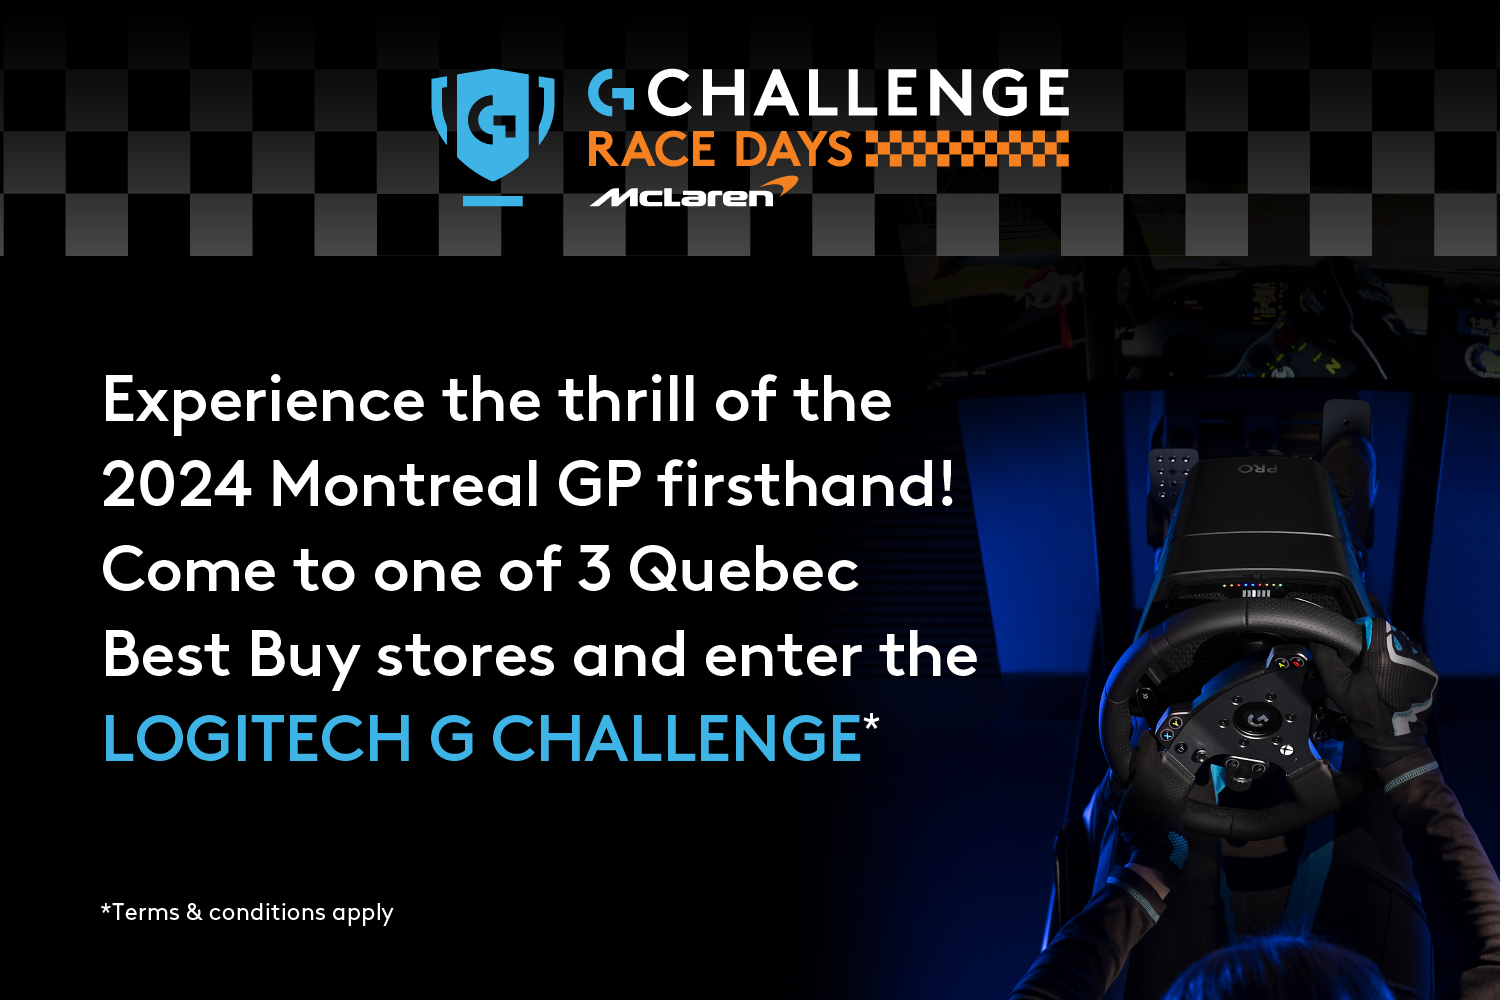 Logitech G Challenge race days at select Best Buy stores in Quebec. Experience the thrill of the 2024 Montreal GP firsthand!